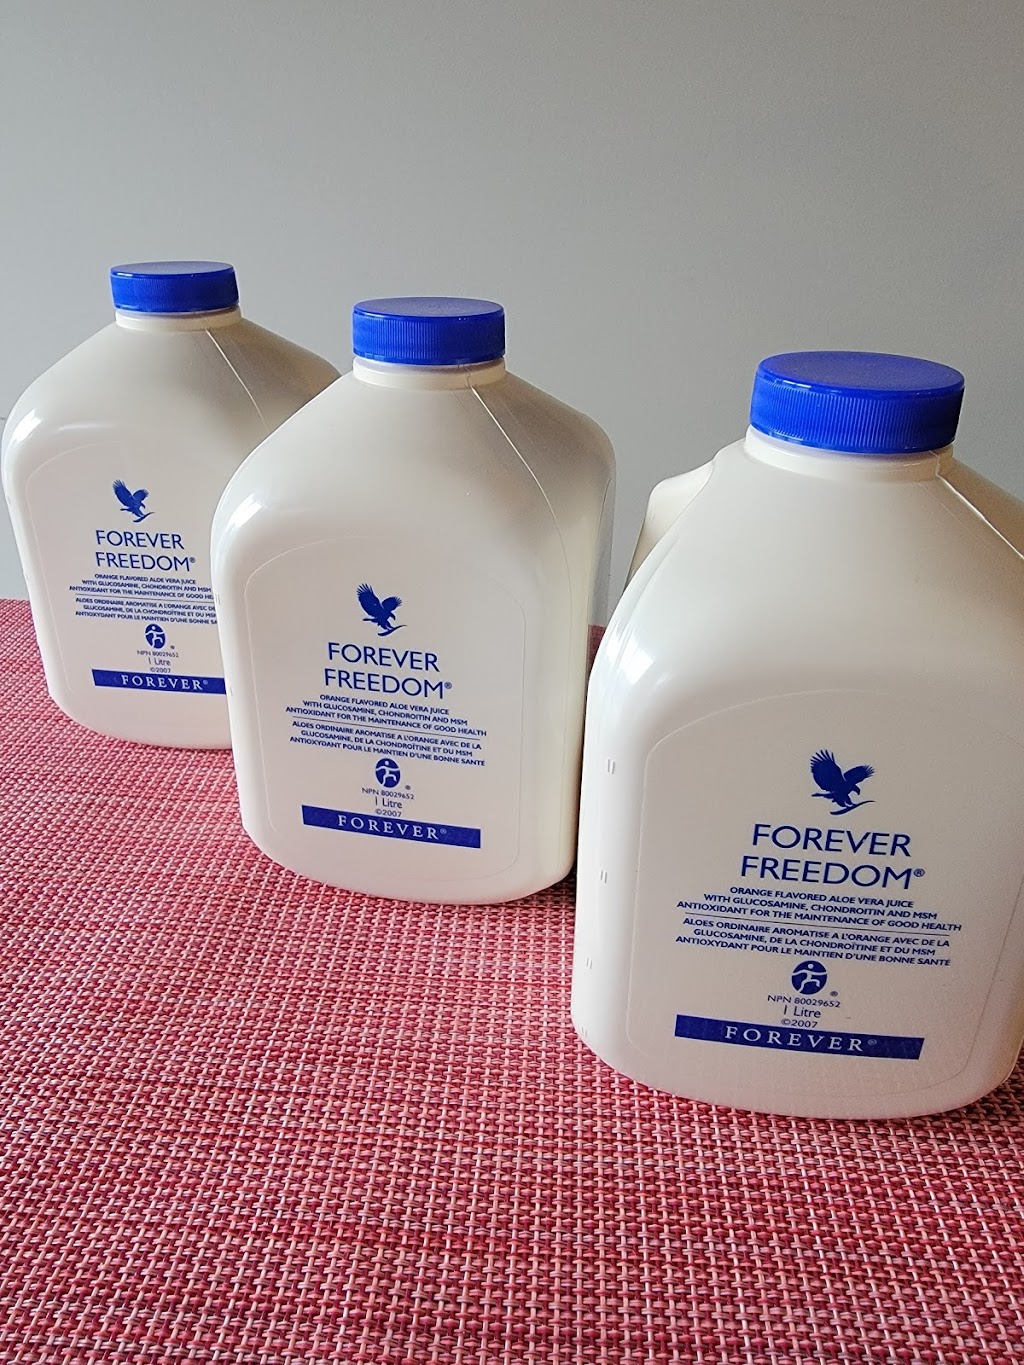 Forever Aloe Vera Products | store | 20720 99 Ave NW, Edmonton, AB T5T 7G3, Canada | 5879377991 OR +1 587-937-7991